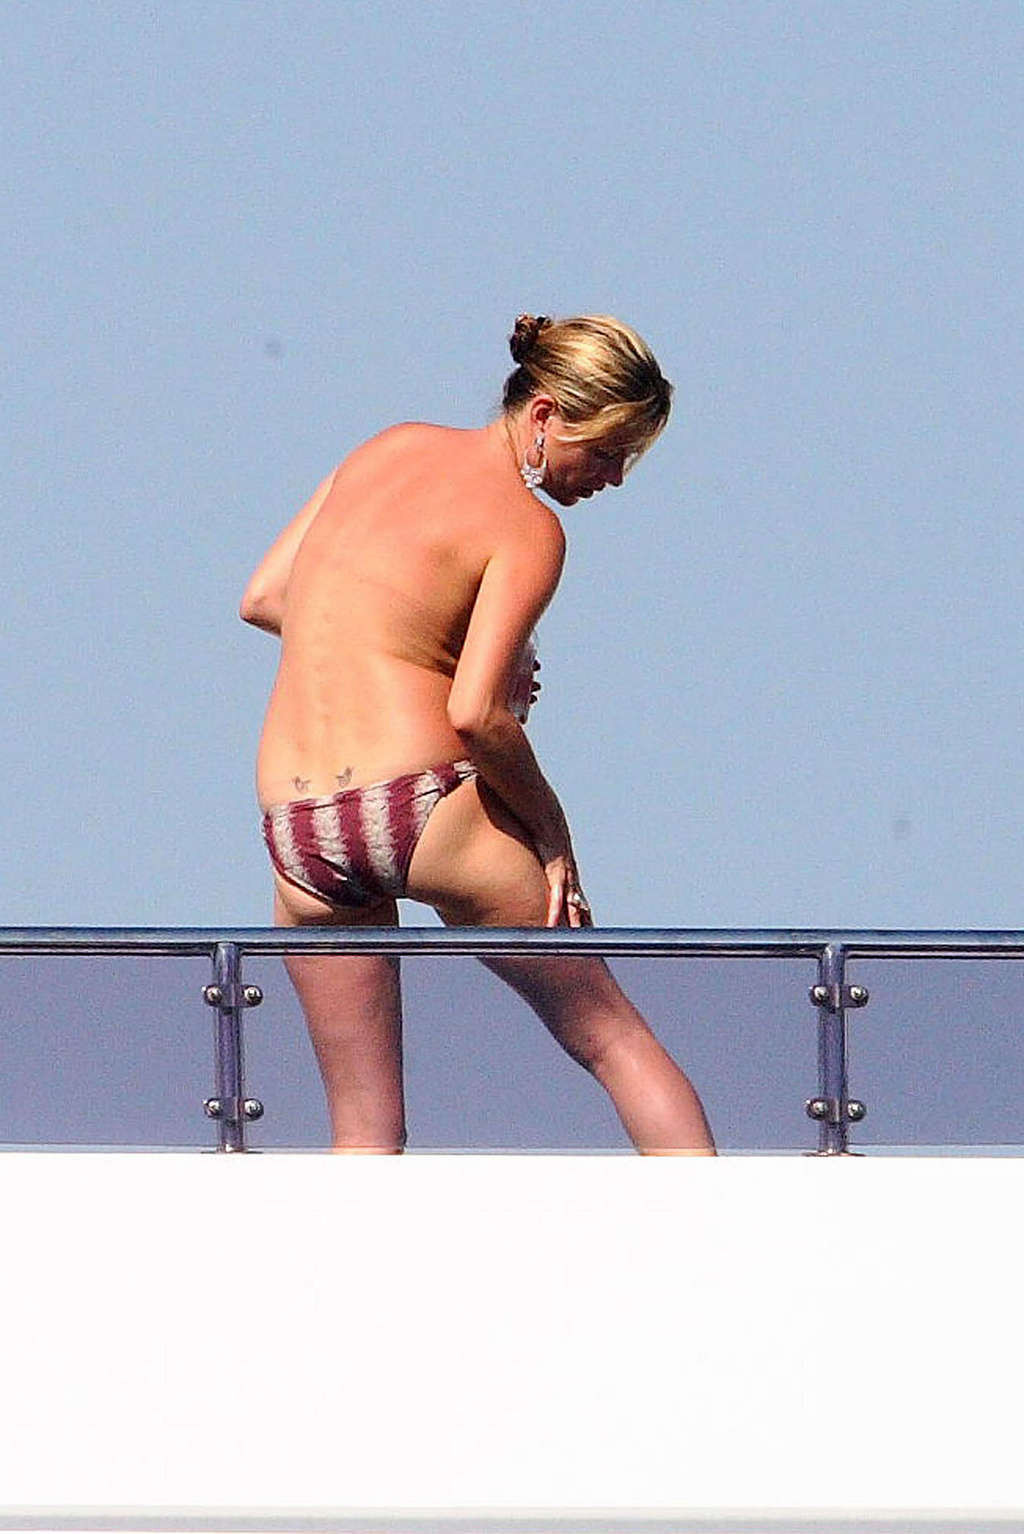 Kate Moss has a nipple slip and enjoying on yaht in topless #75369788